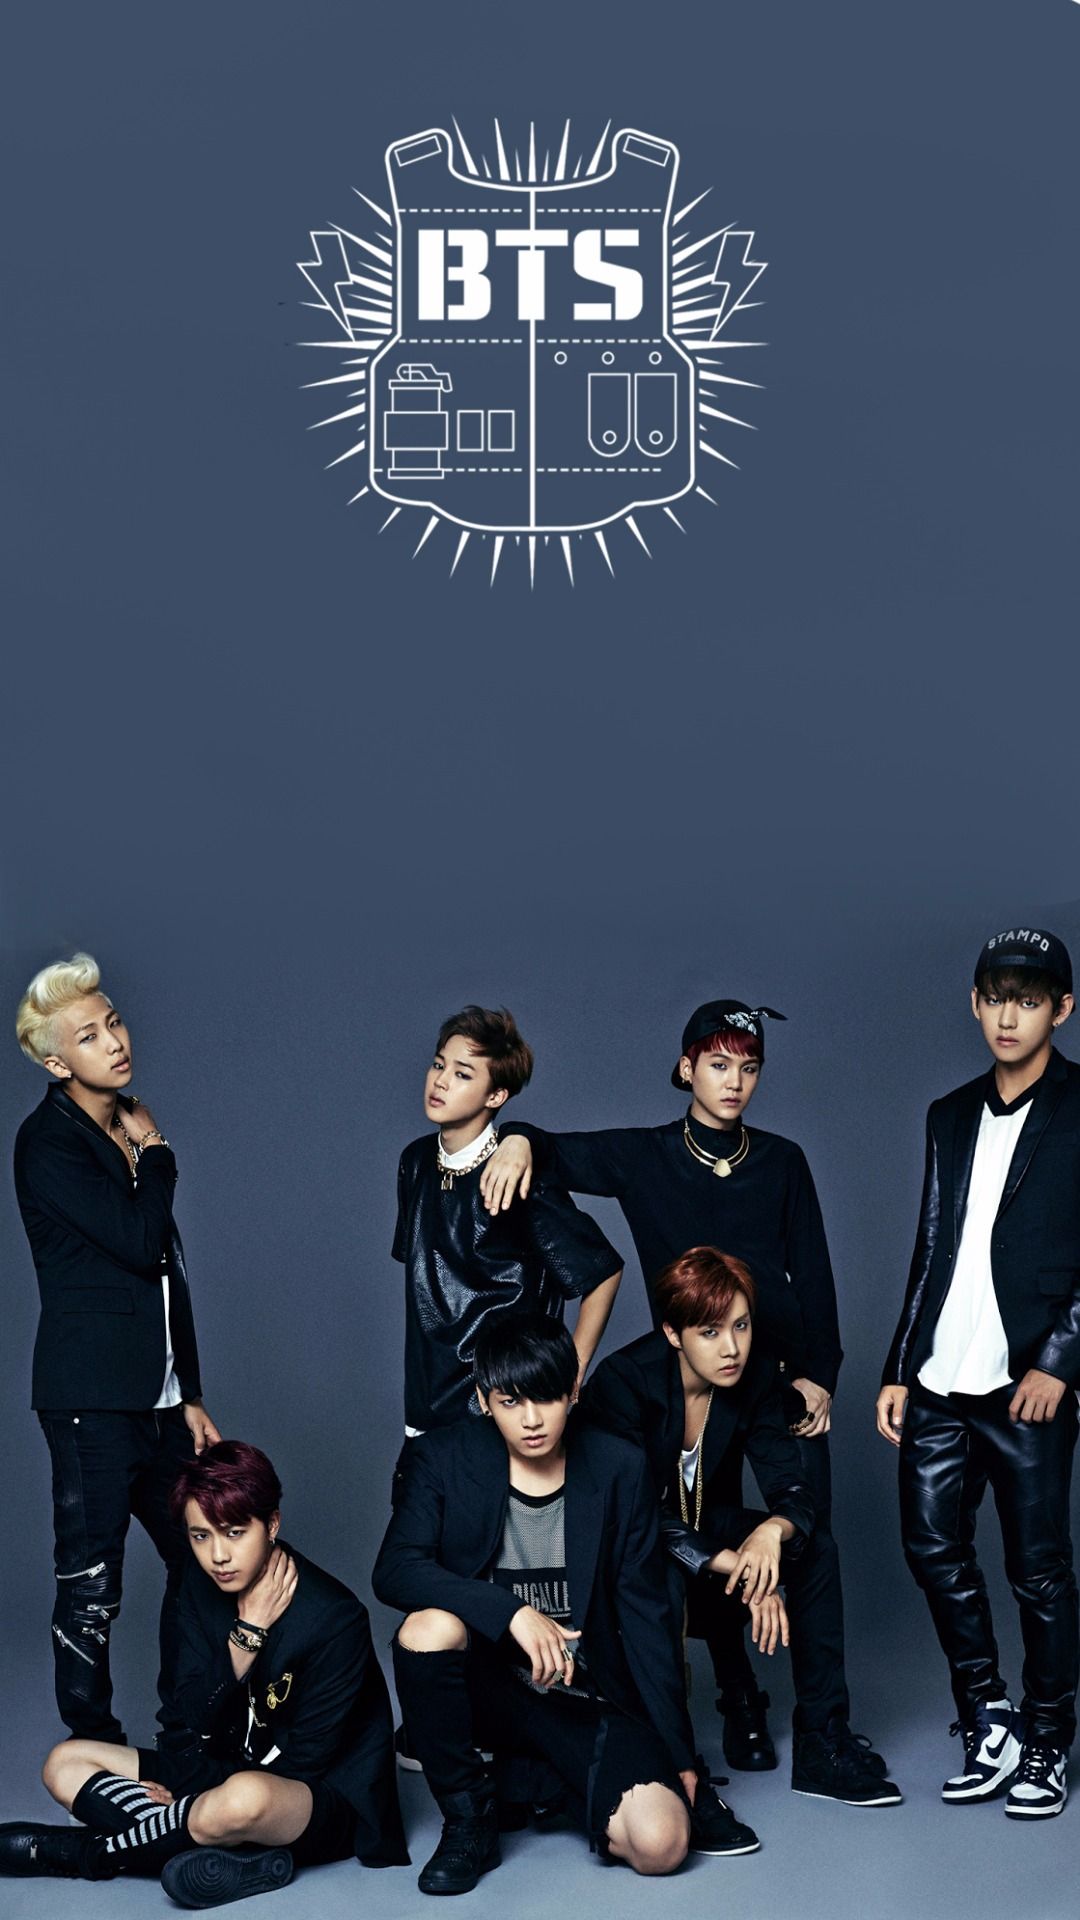 Bts hd wallpapers free download